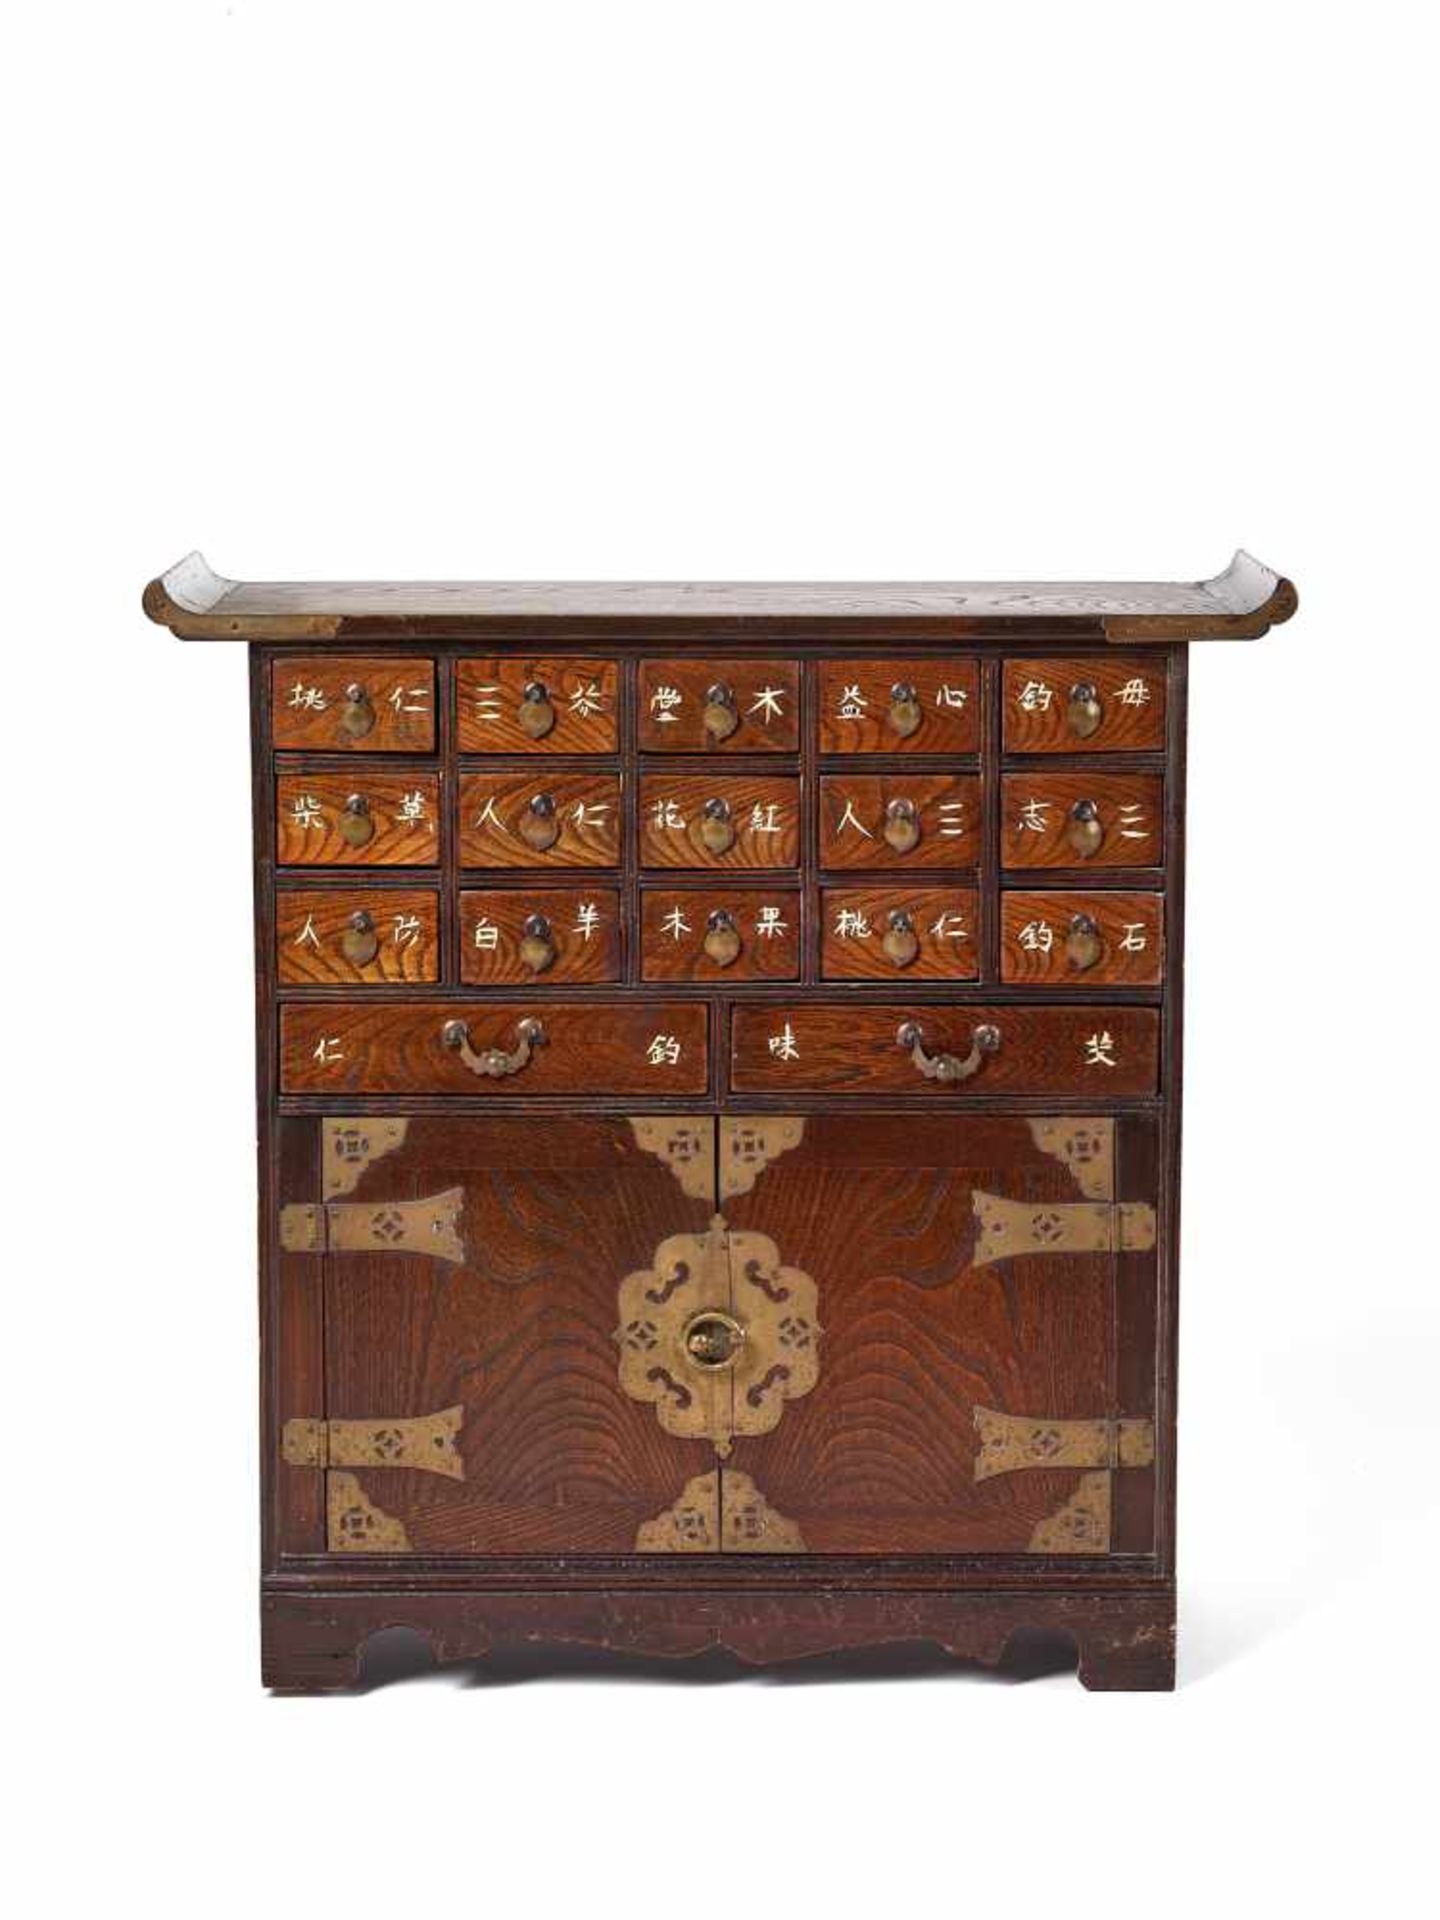 A SMALL AND RARE KOREAN PHARMACY CHEST, LATE 19th CENTURYMade of solid hardwood with various